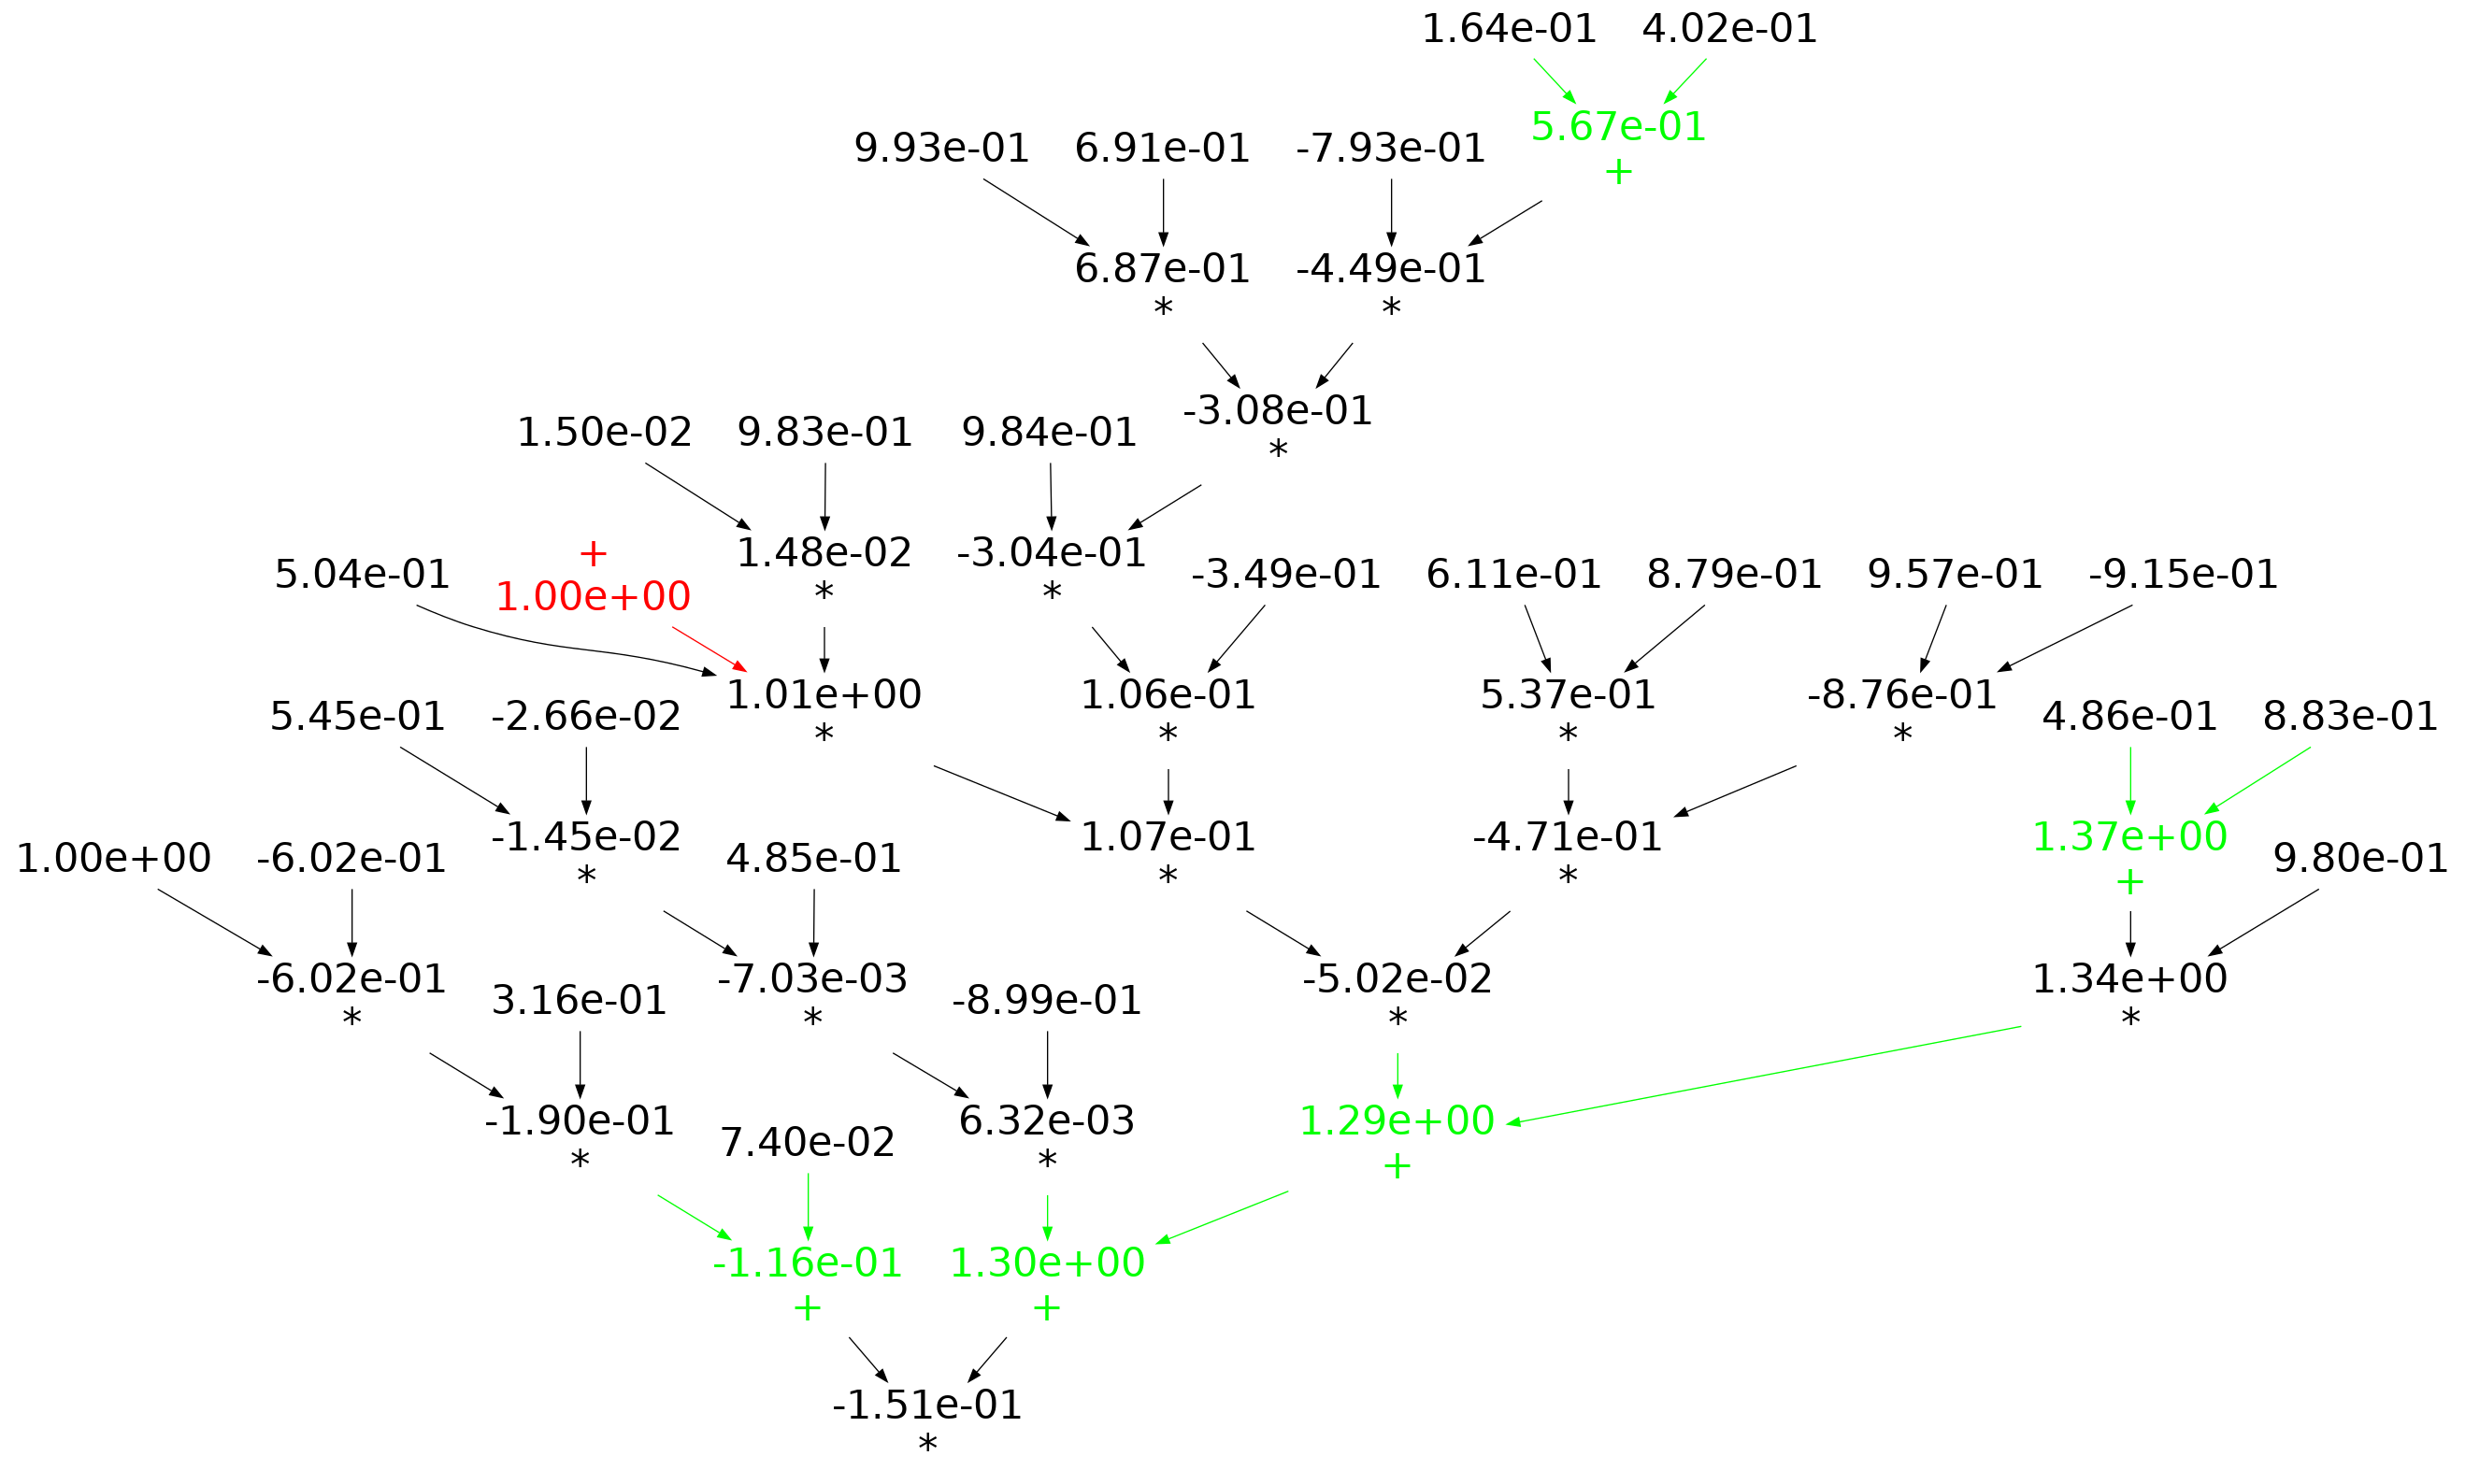 Example of a 'bushy' expression tree containing 25 binary operands.